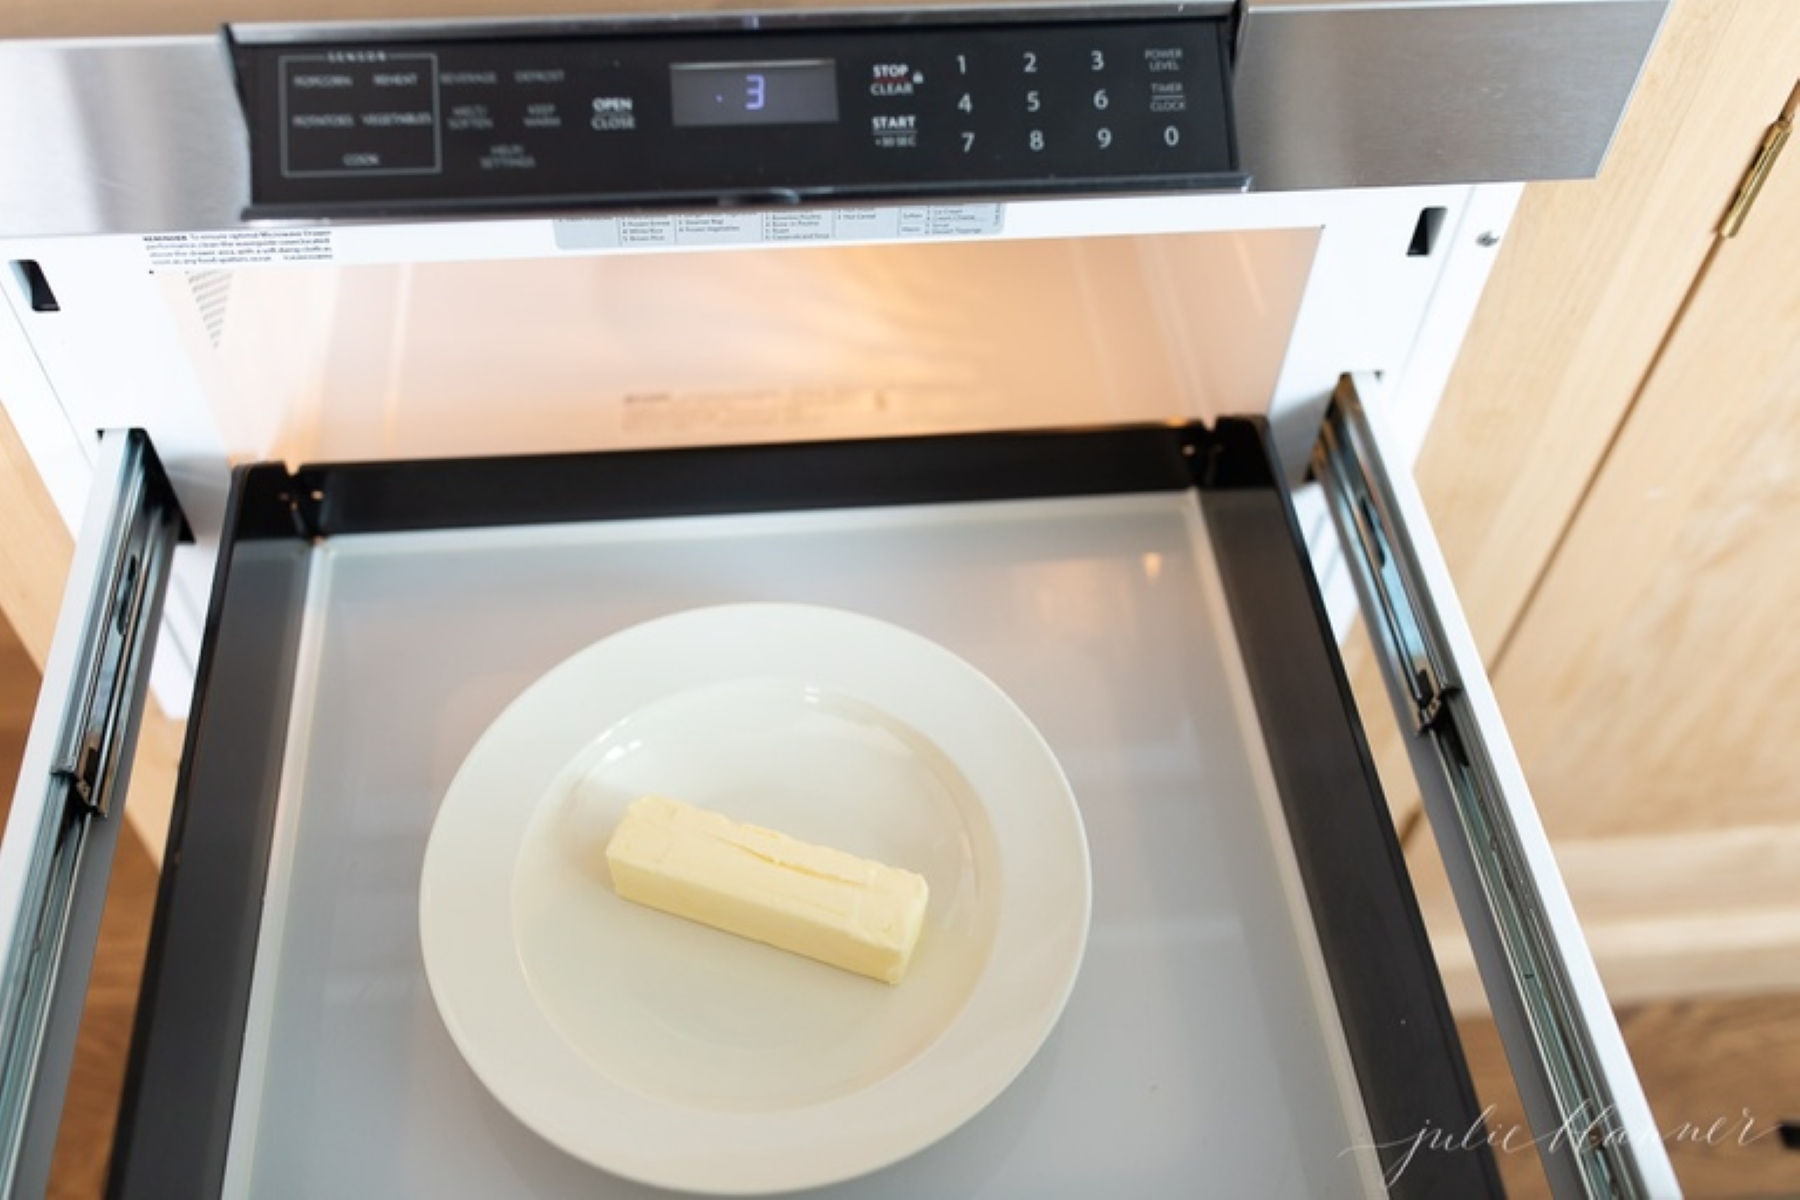 A single stick of butter on a white plate in a drawer microwave.